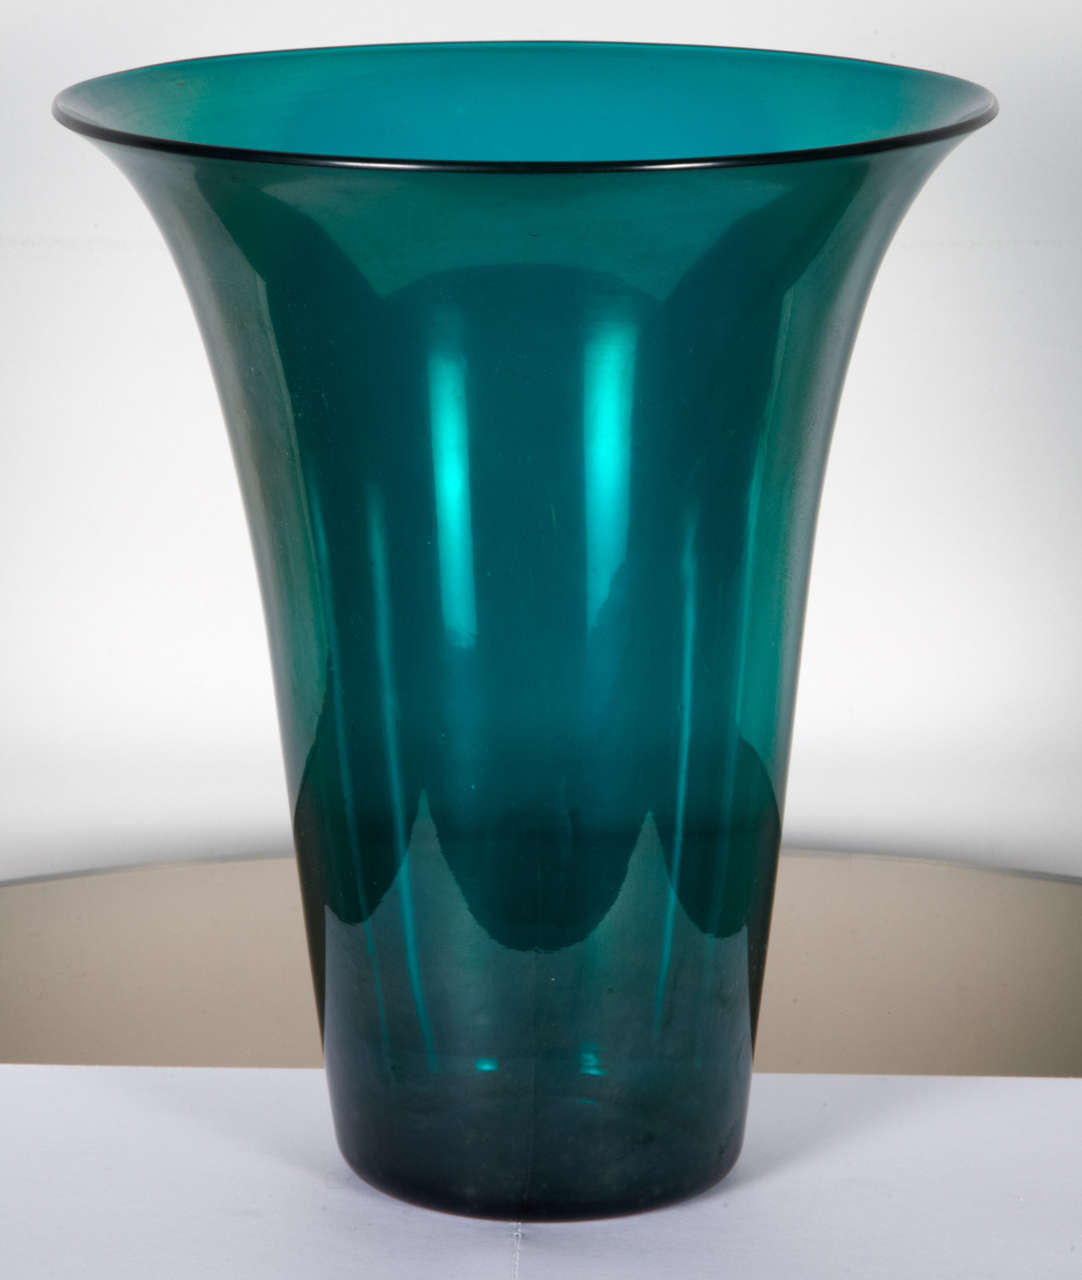 A beautiful glass vase series 